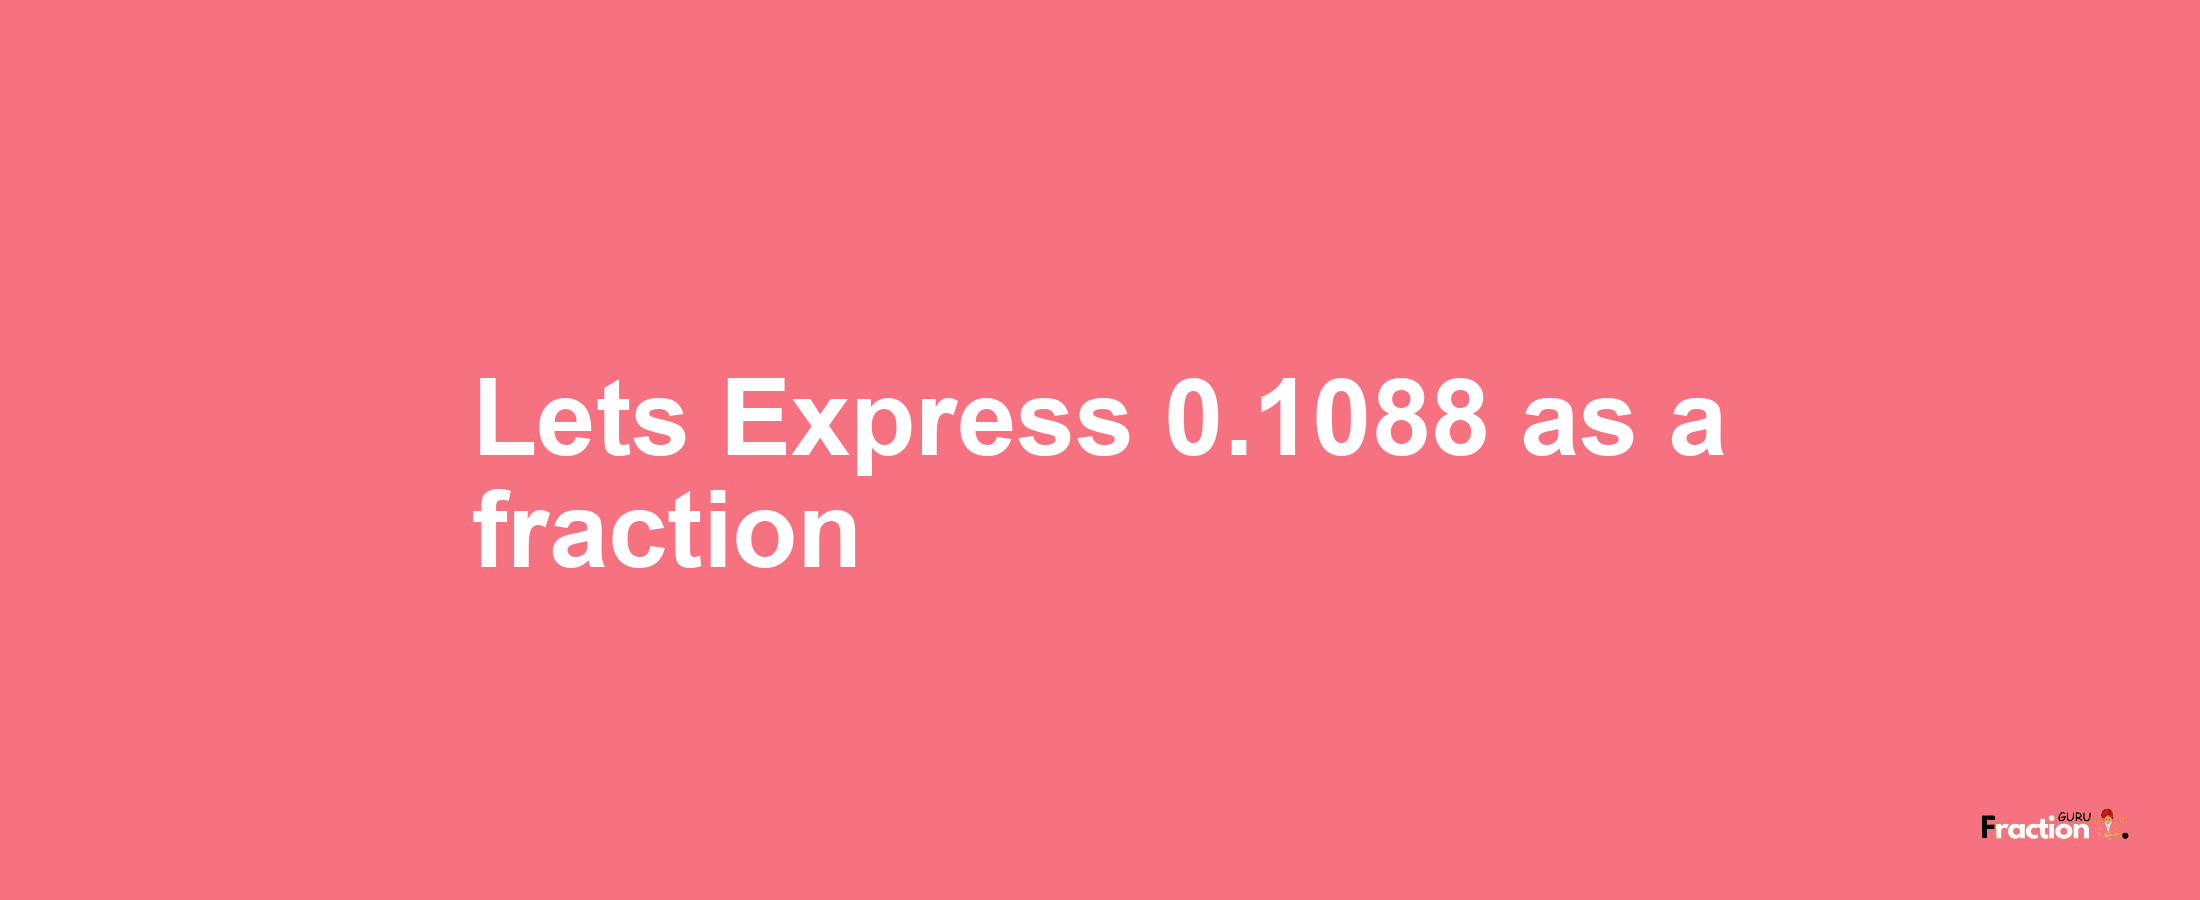 Lets Express 0.1088 as afraction